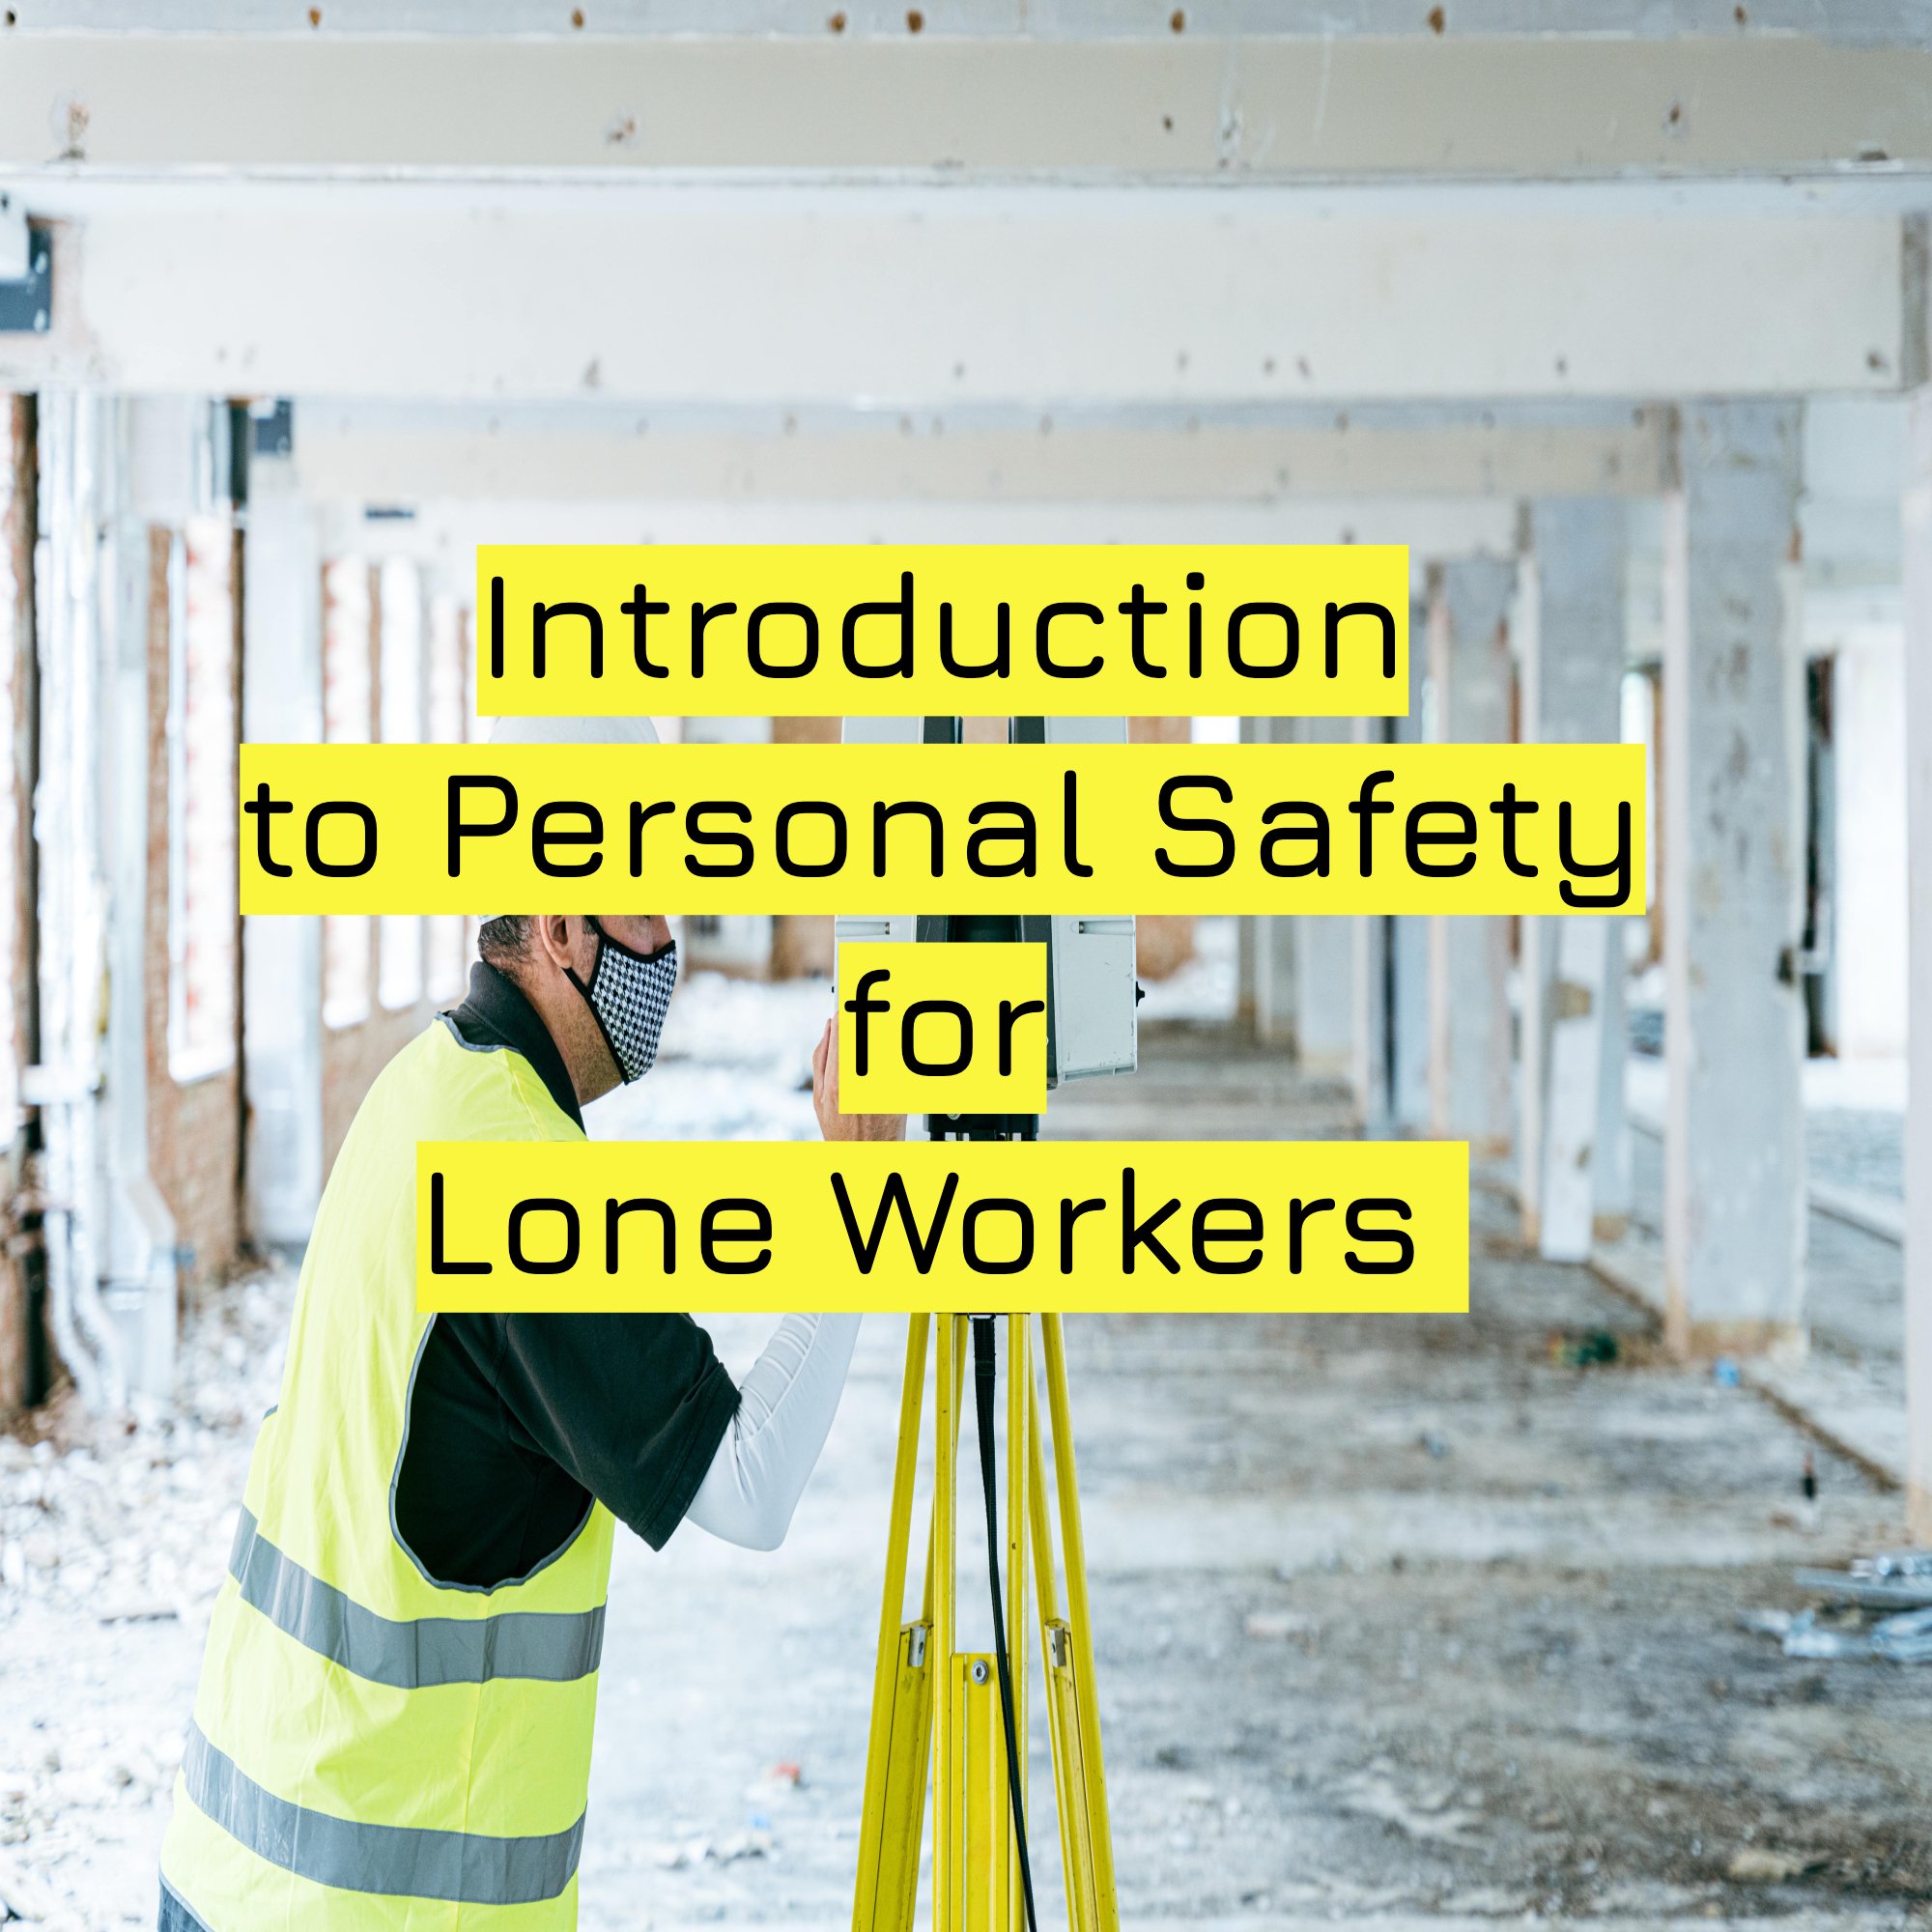 Introduction to Personal Safety for Lone Workers .jpg